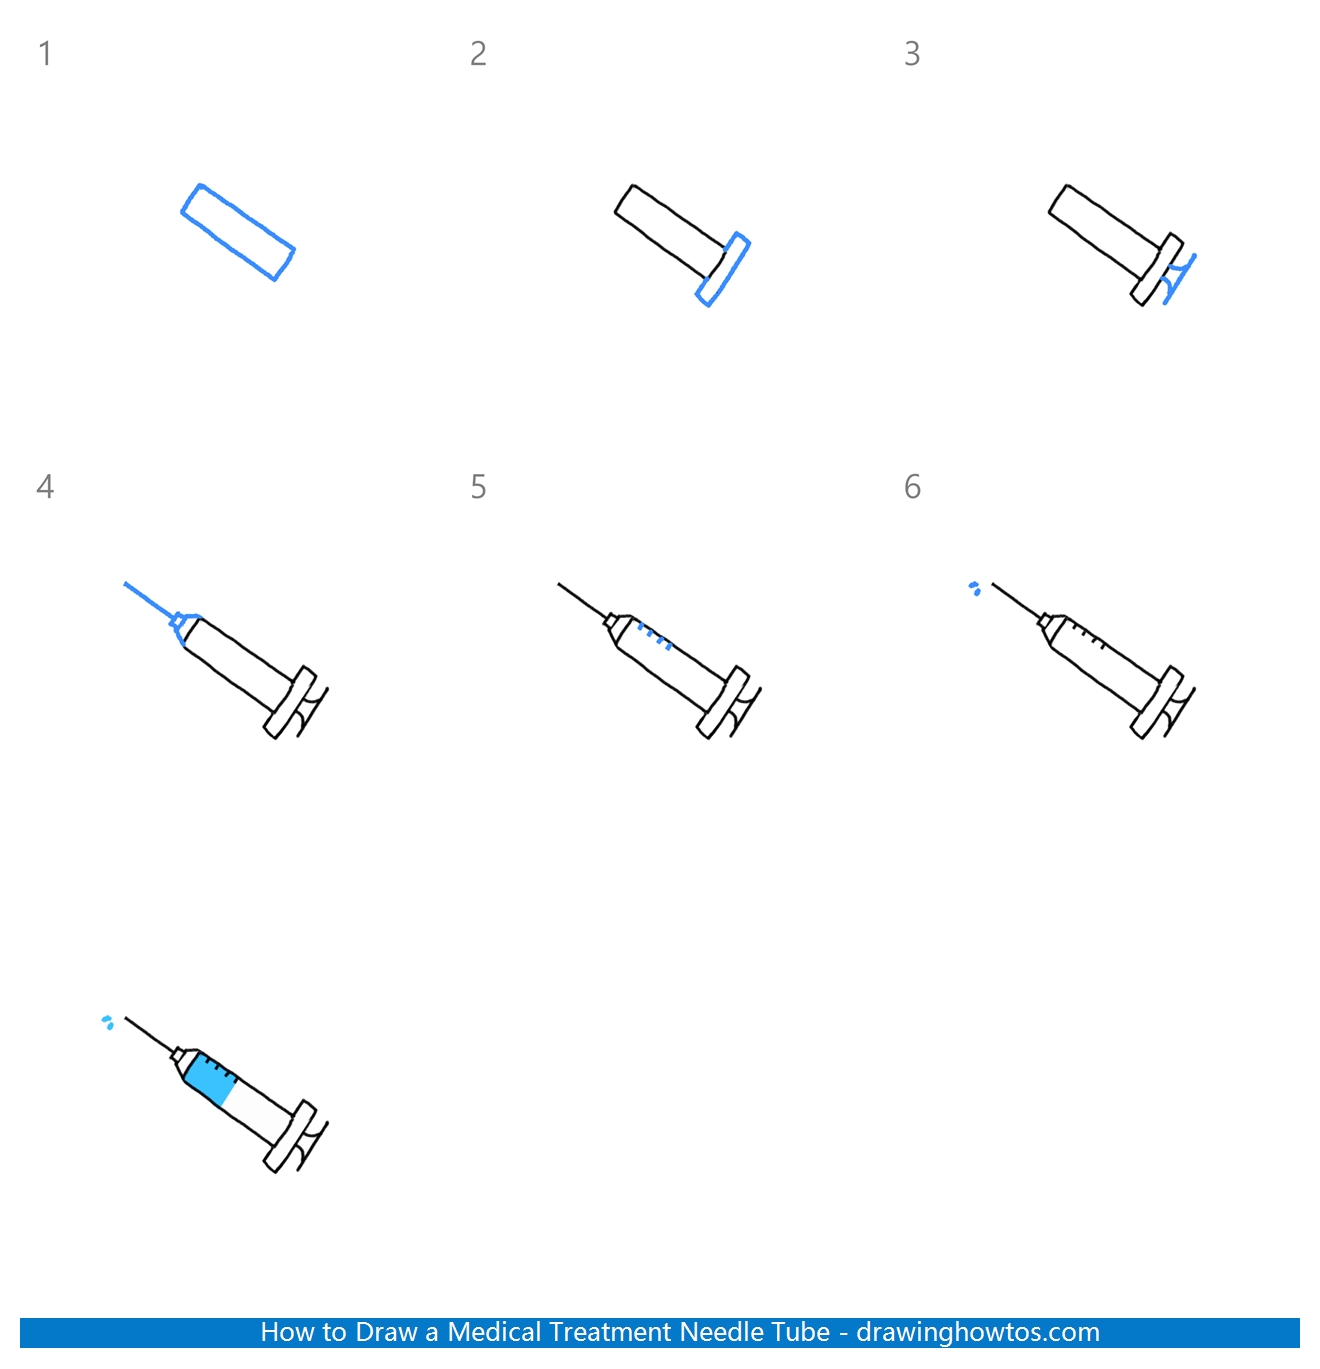 How to Draw a Medical Treatment Needle Tube Step by Step